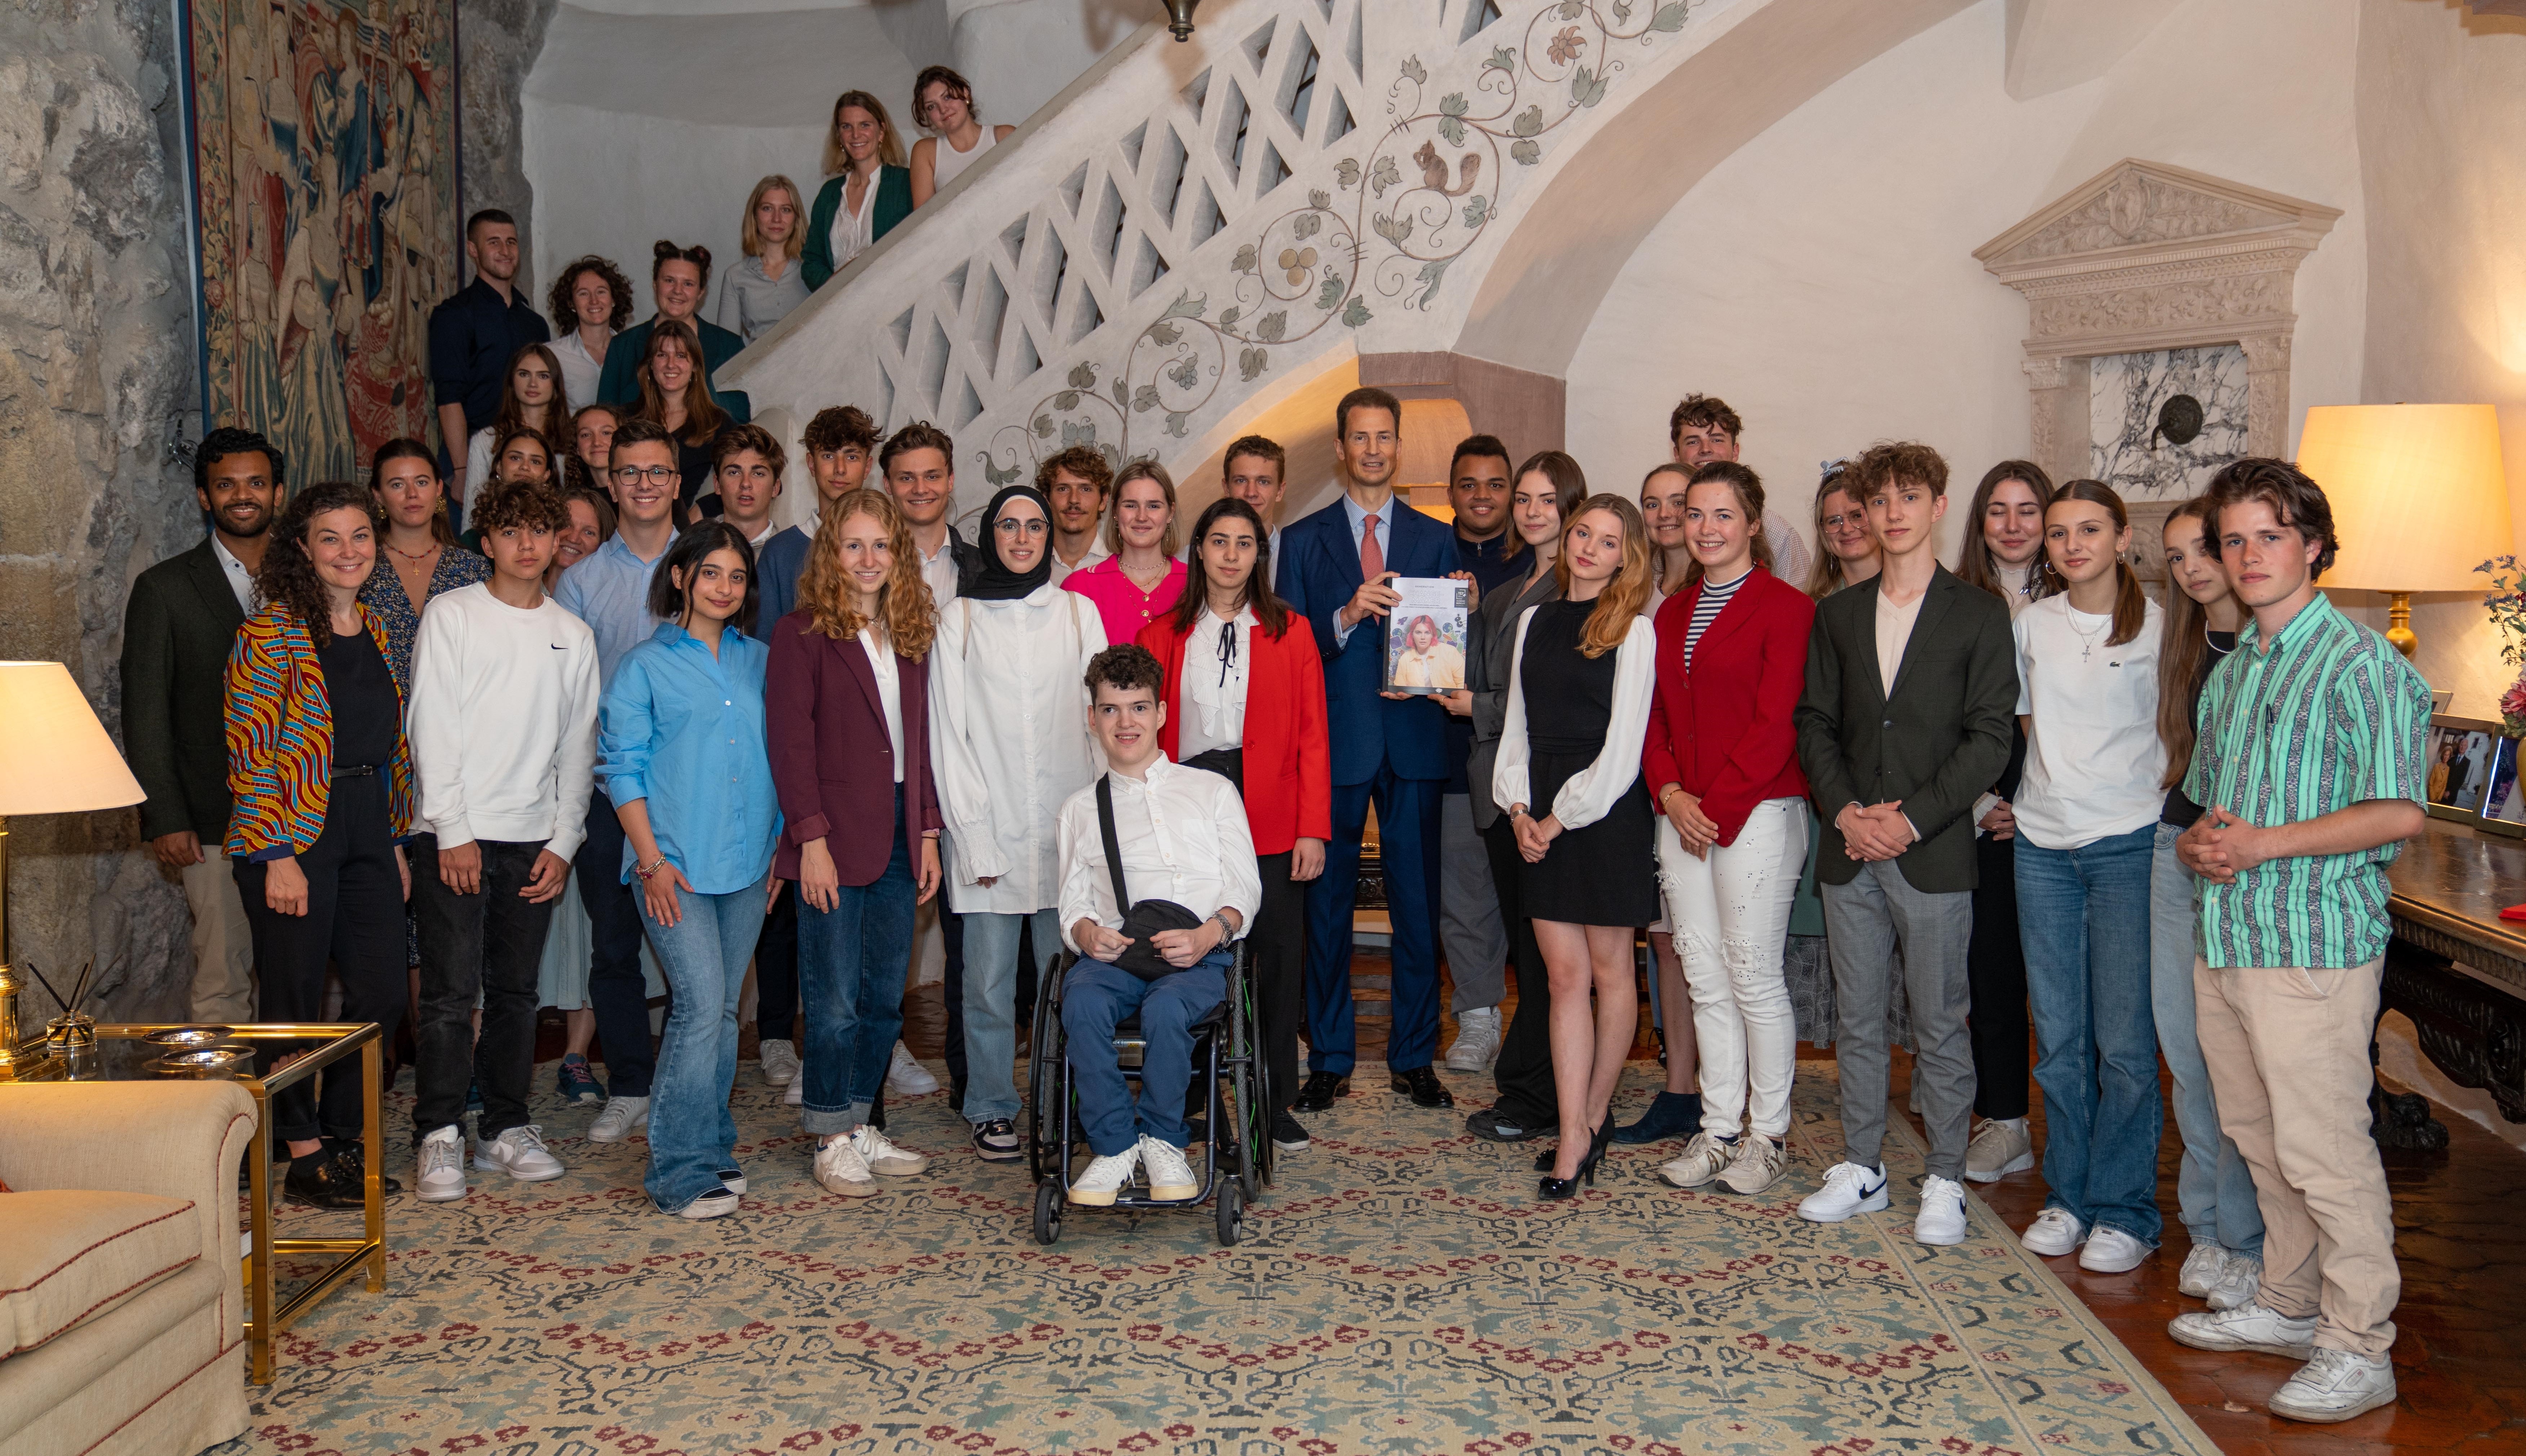 Group picture of the current cohort of the Generation Chanagemaker program with representatives from Liechntestein Royal Family